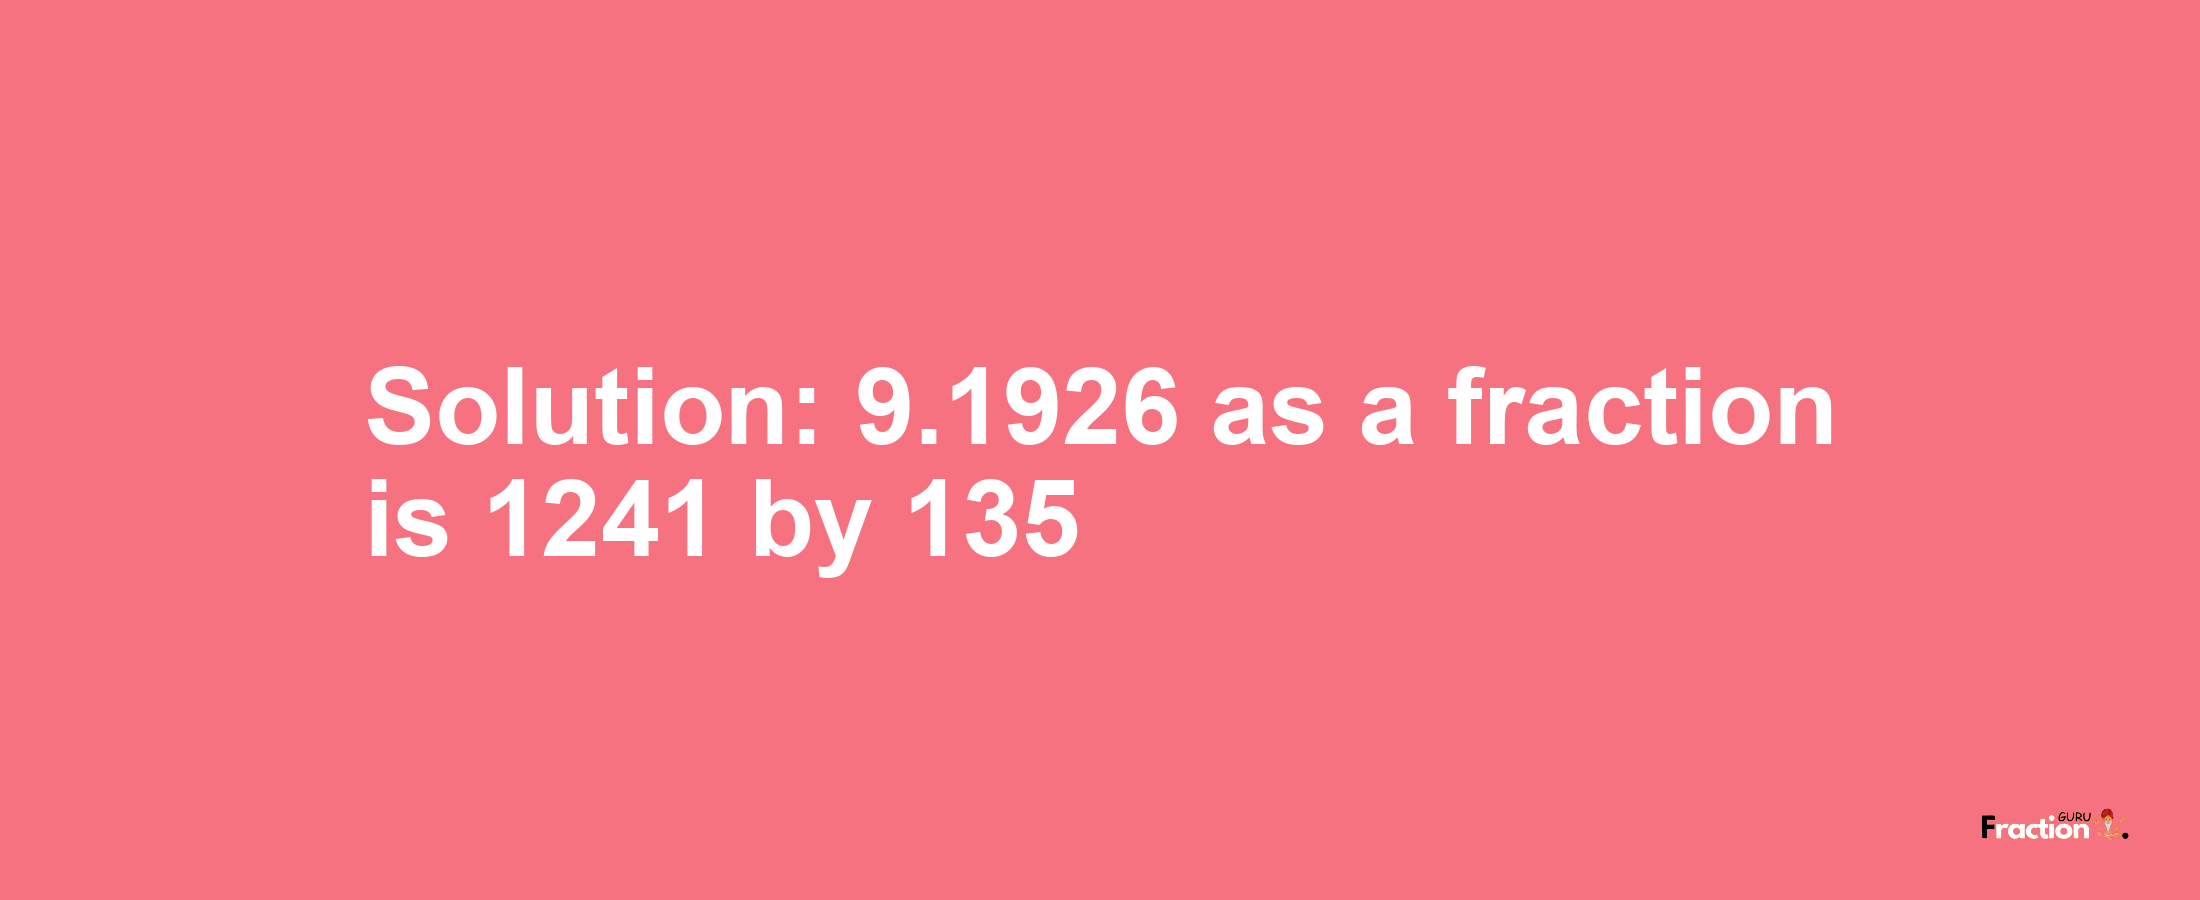 Solution:9.1926 as a fraction is 1241/135